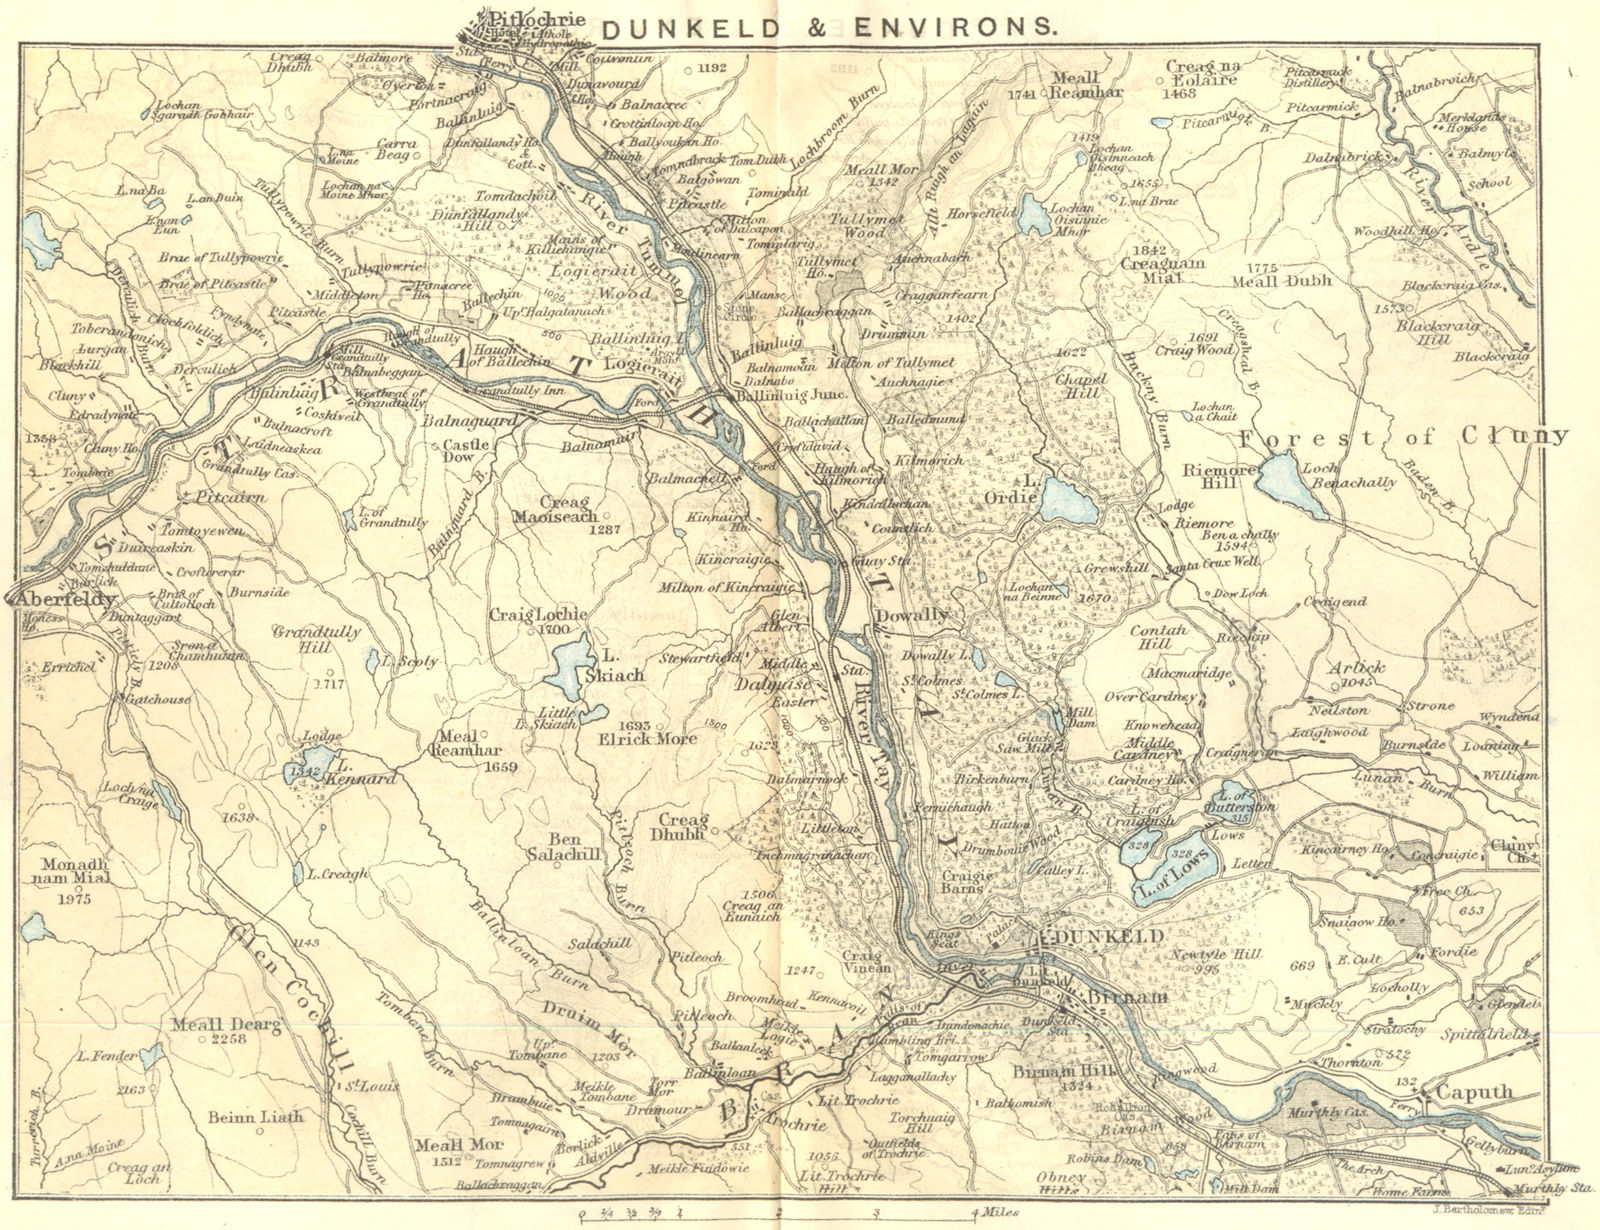 Associate Product SCOTLAND. Dunkeld & environs. Strath Tay Pitlochrie Forest of Cluny 1887 map